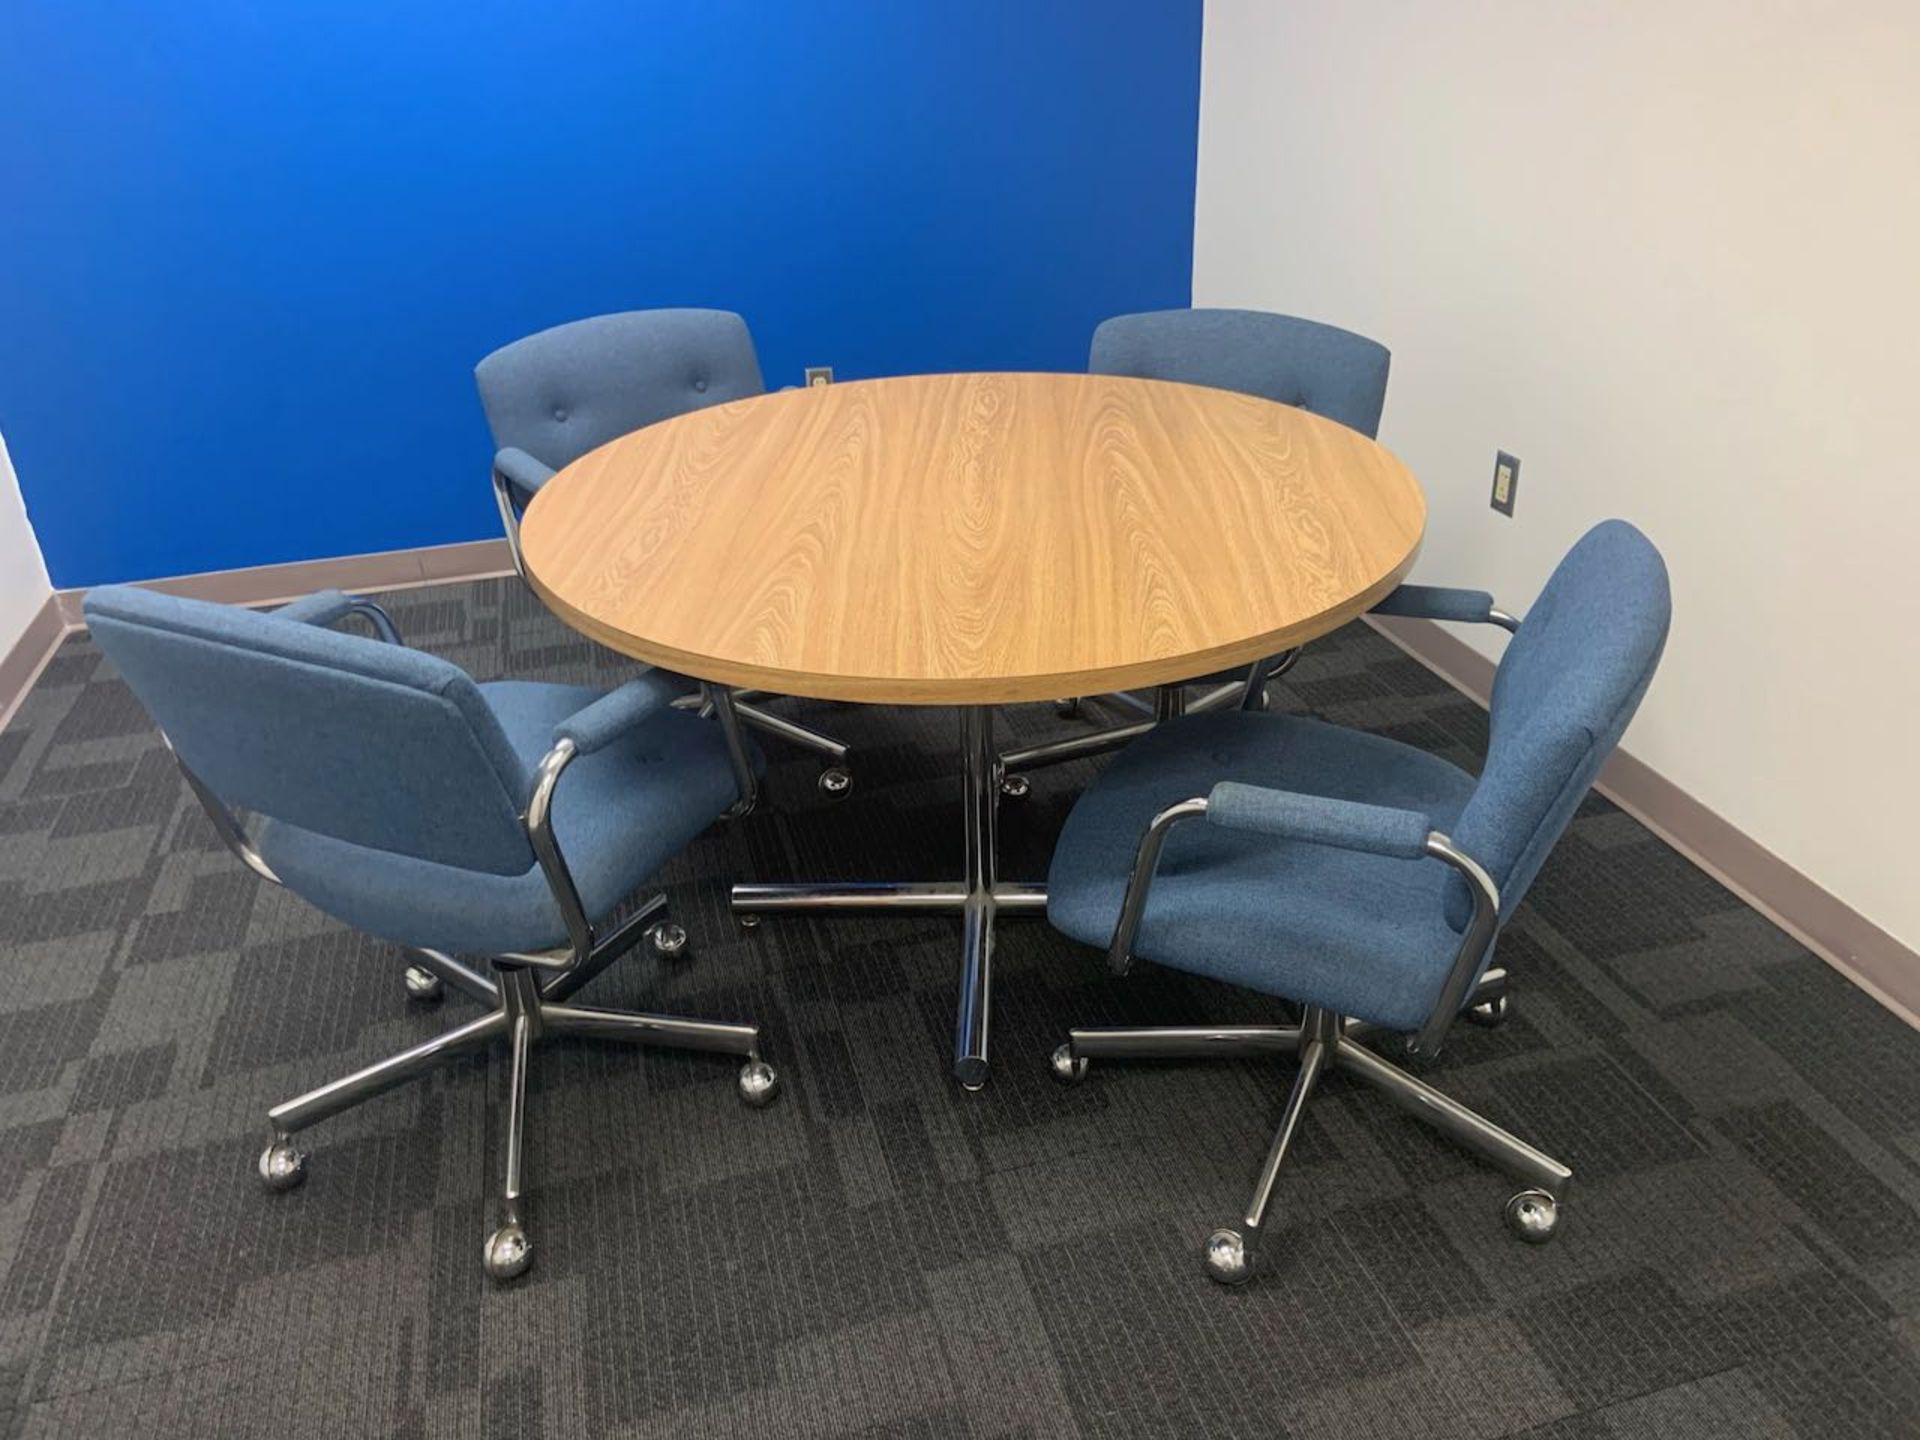 48" round table & 4 chairs